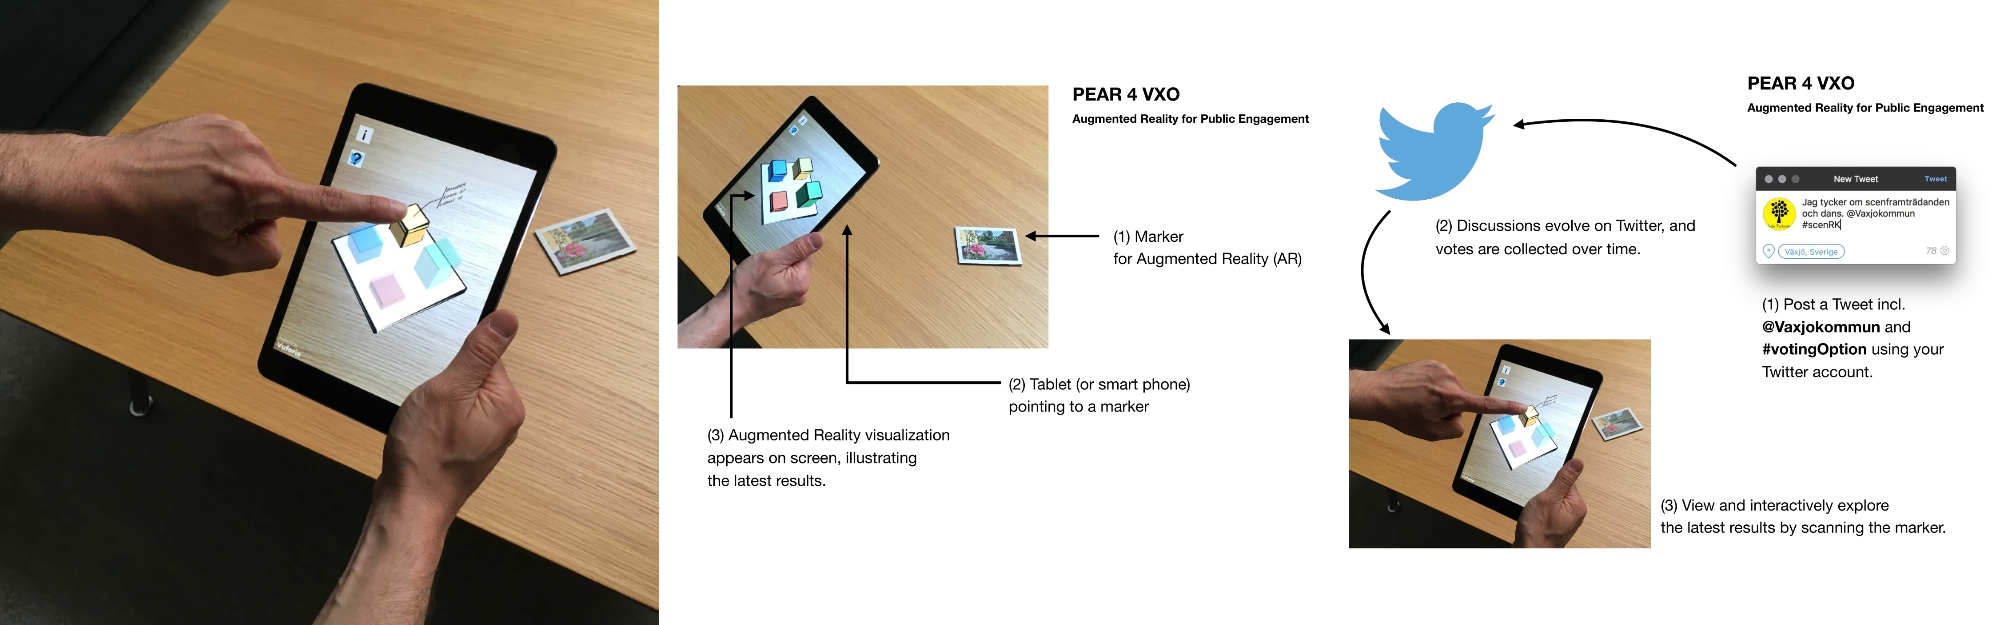 A collage of three images that visually representing the research about Augmented Reality for Public Engagement (PEAR).